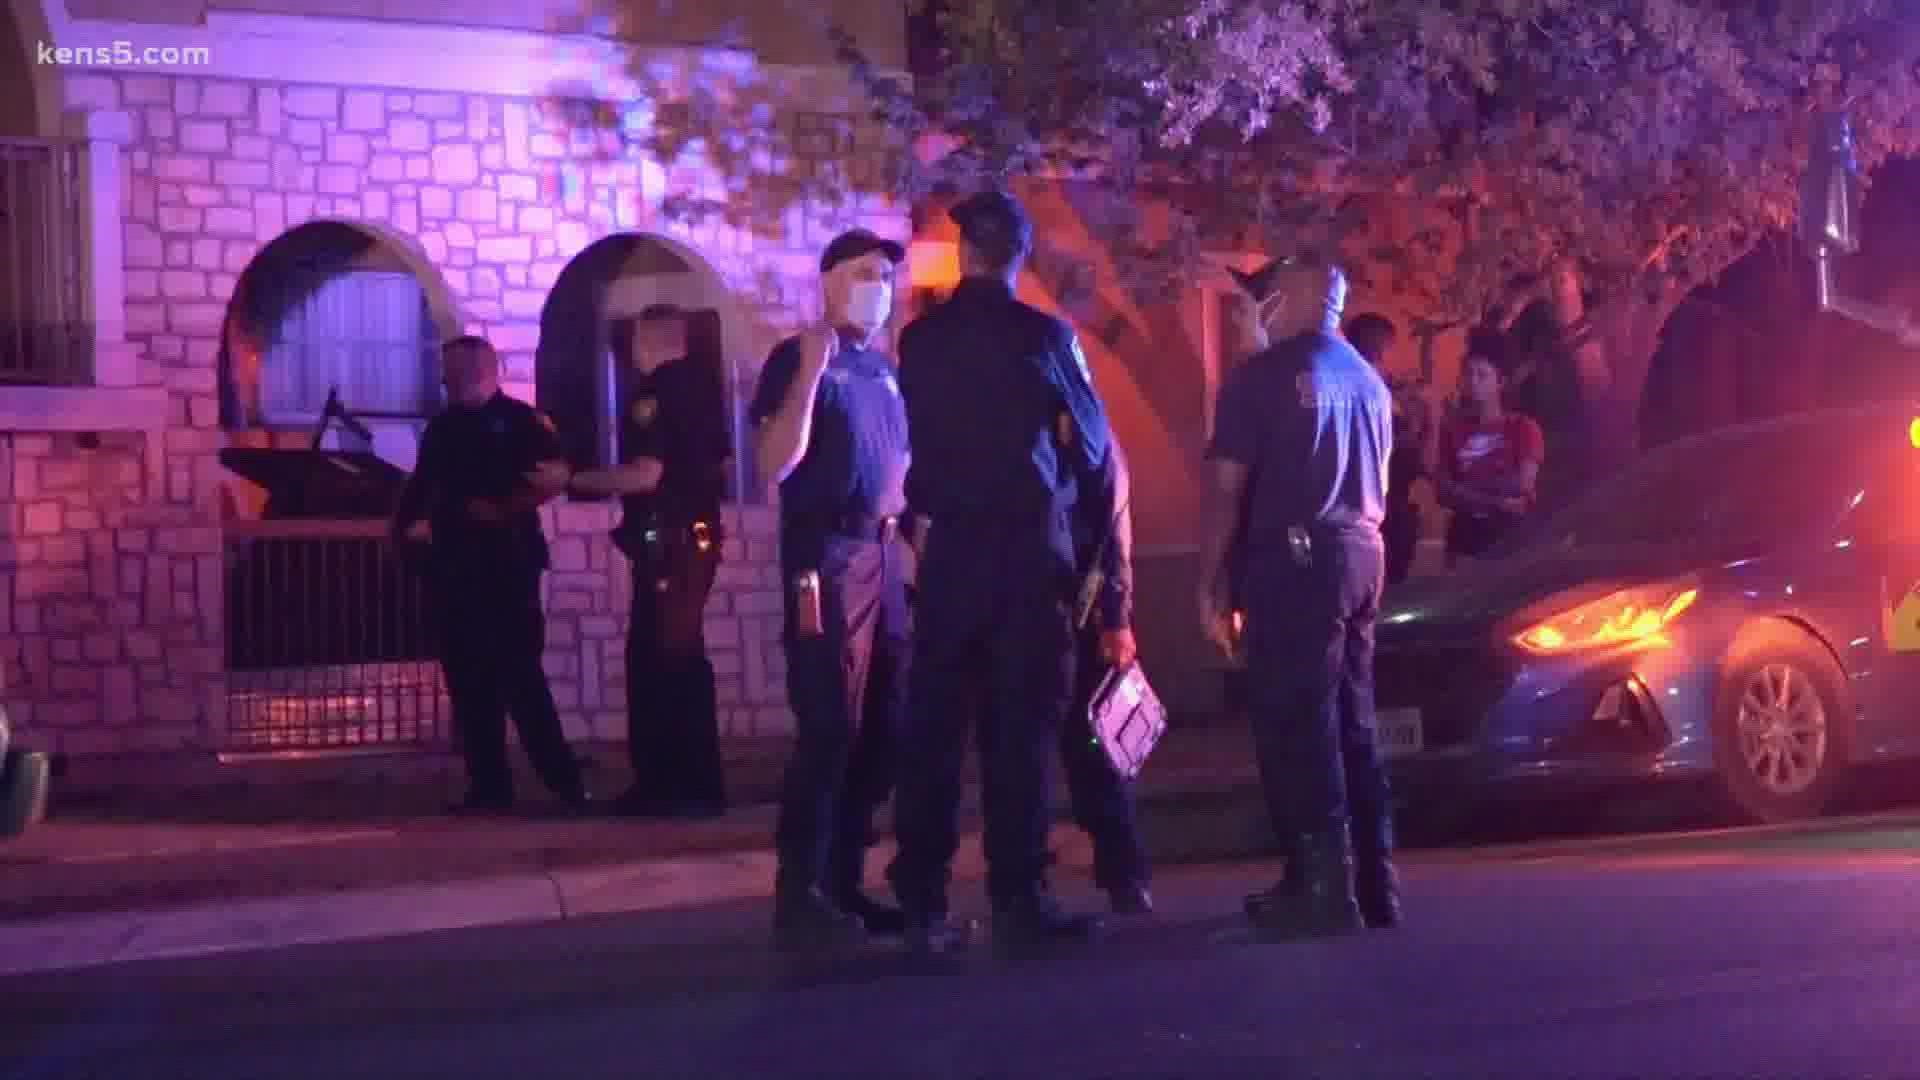 Teen shot in the chest at party in apartment on south side | kens5.com